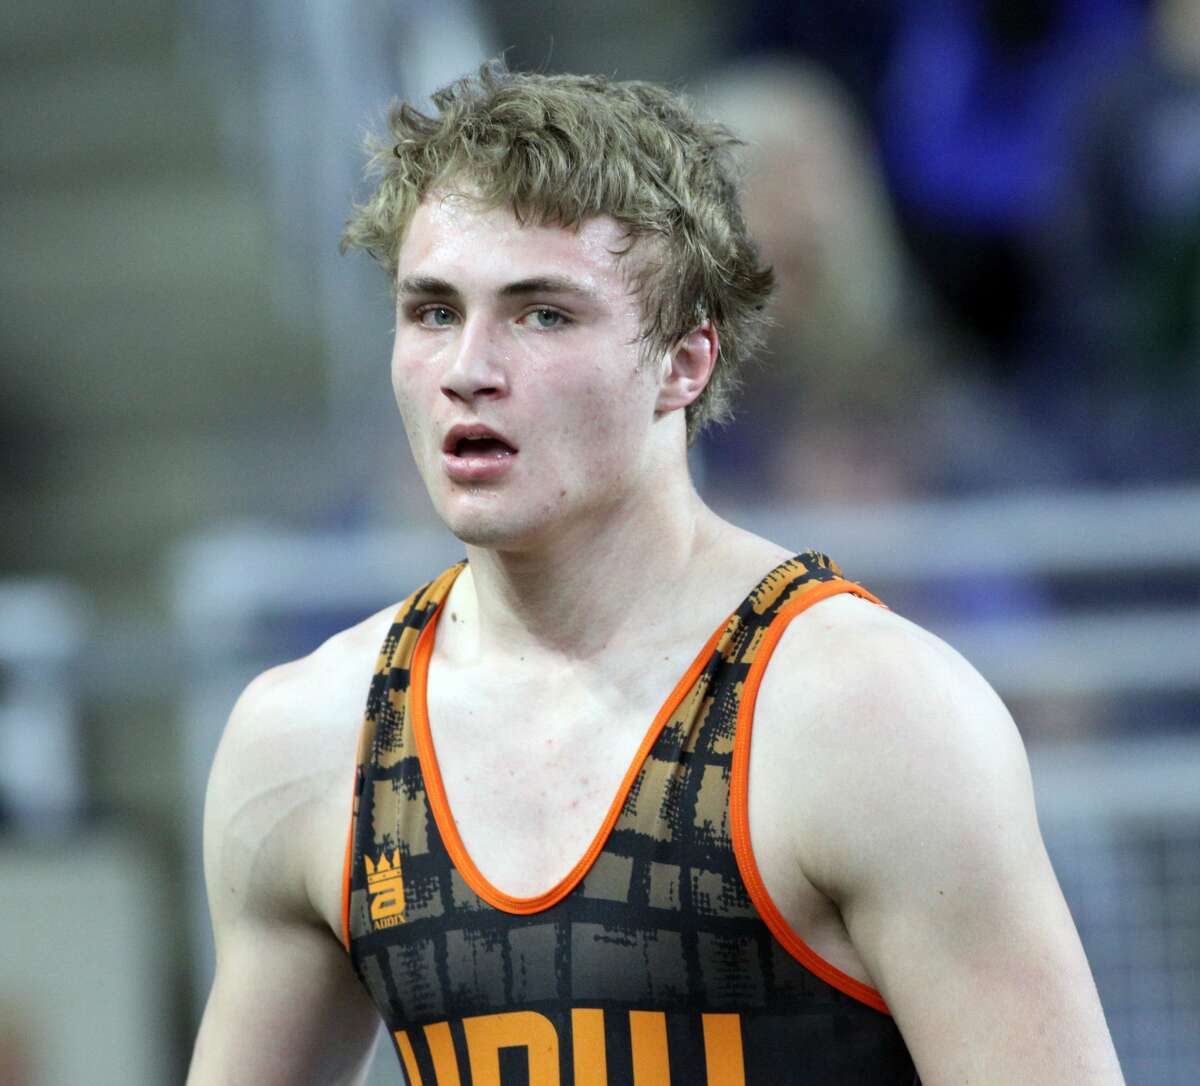 Ubly wrestler Shane Osantowski took second place at the Division 4 state finals at Ford Field on Saturday, March 7.